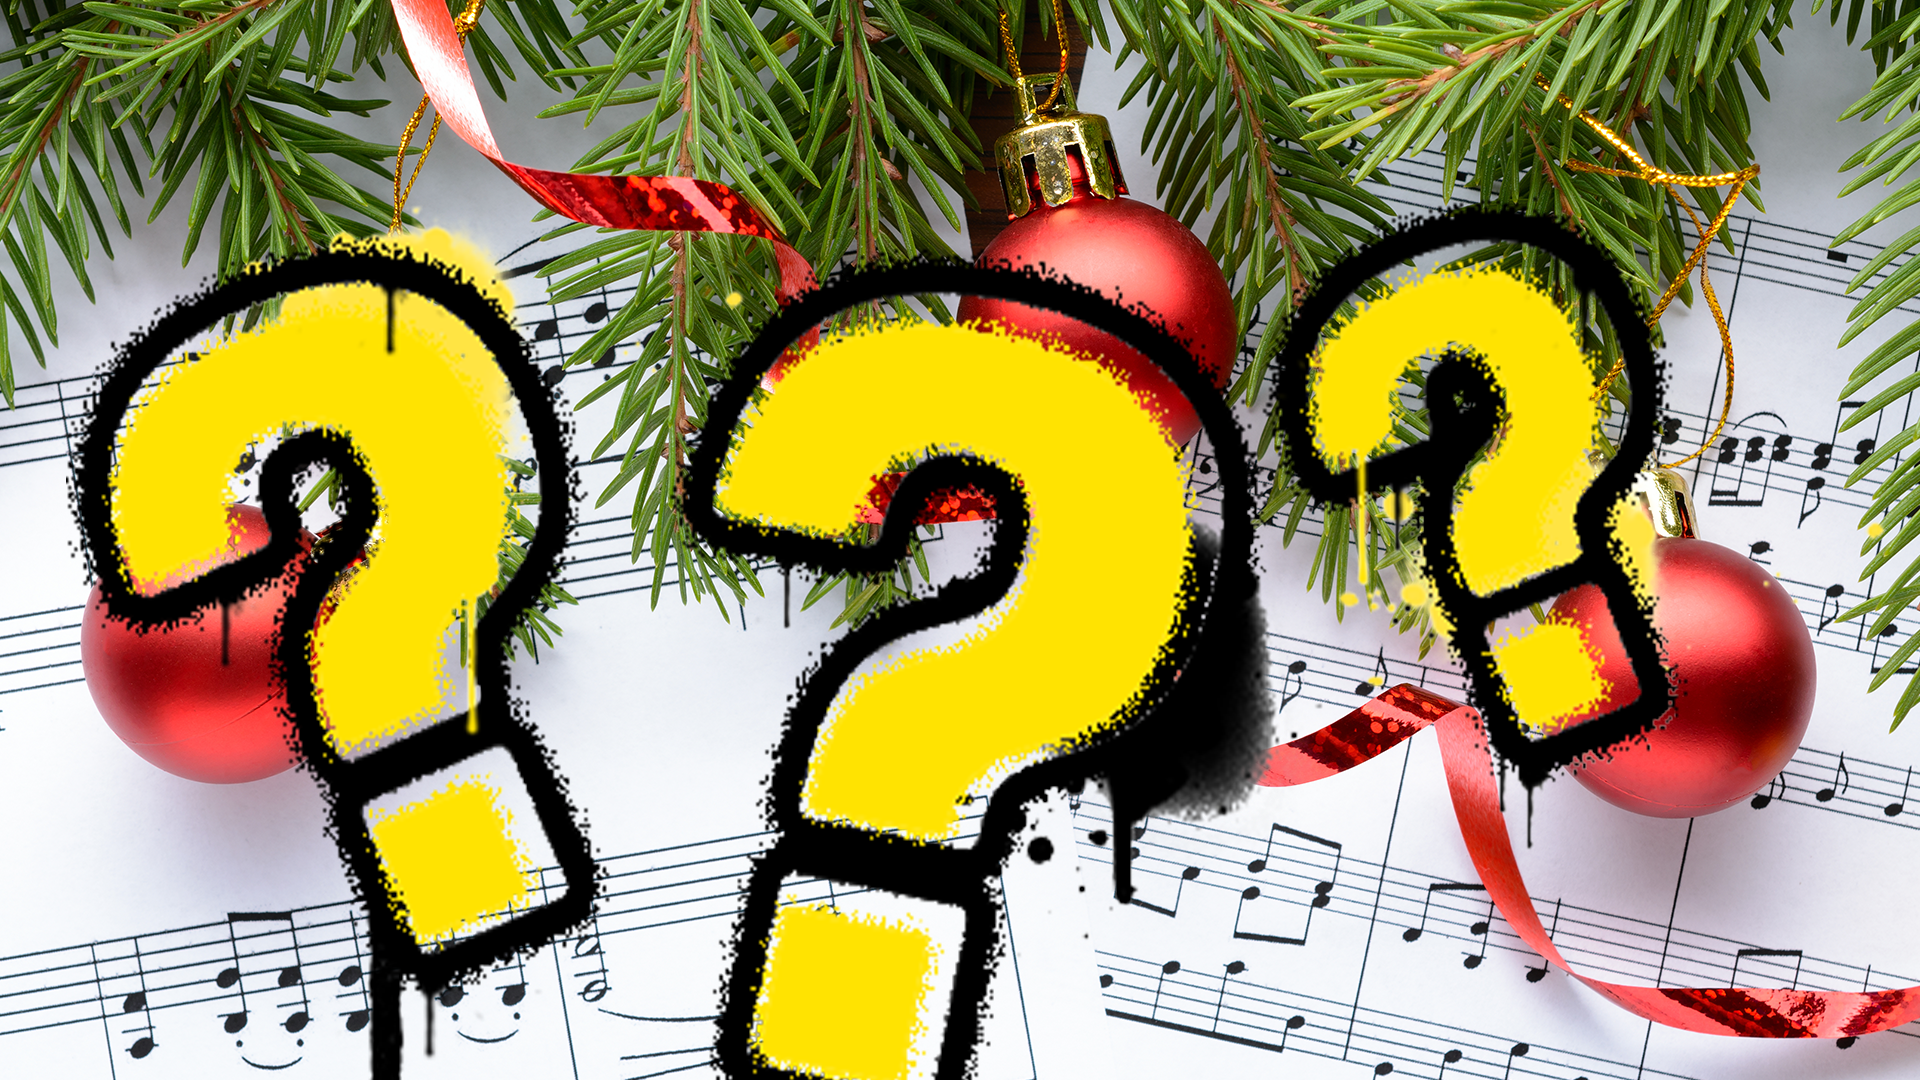 Christmas music and question marks